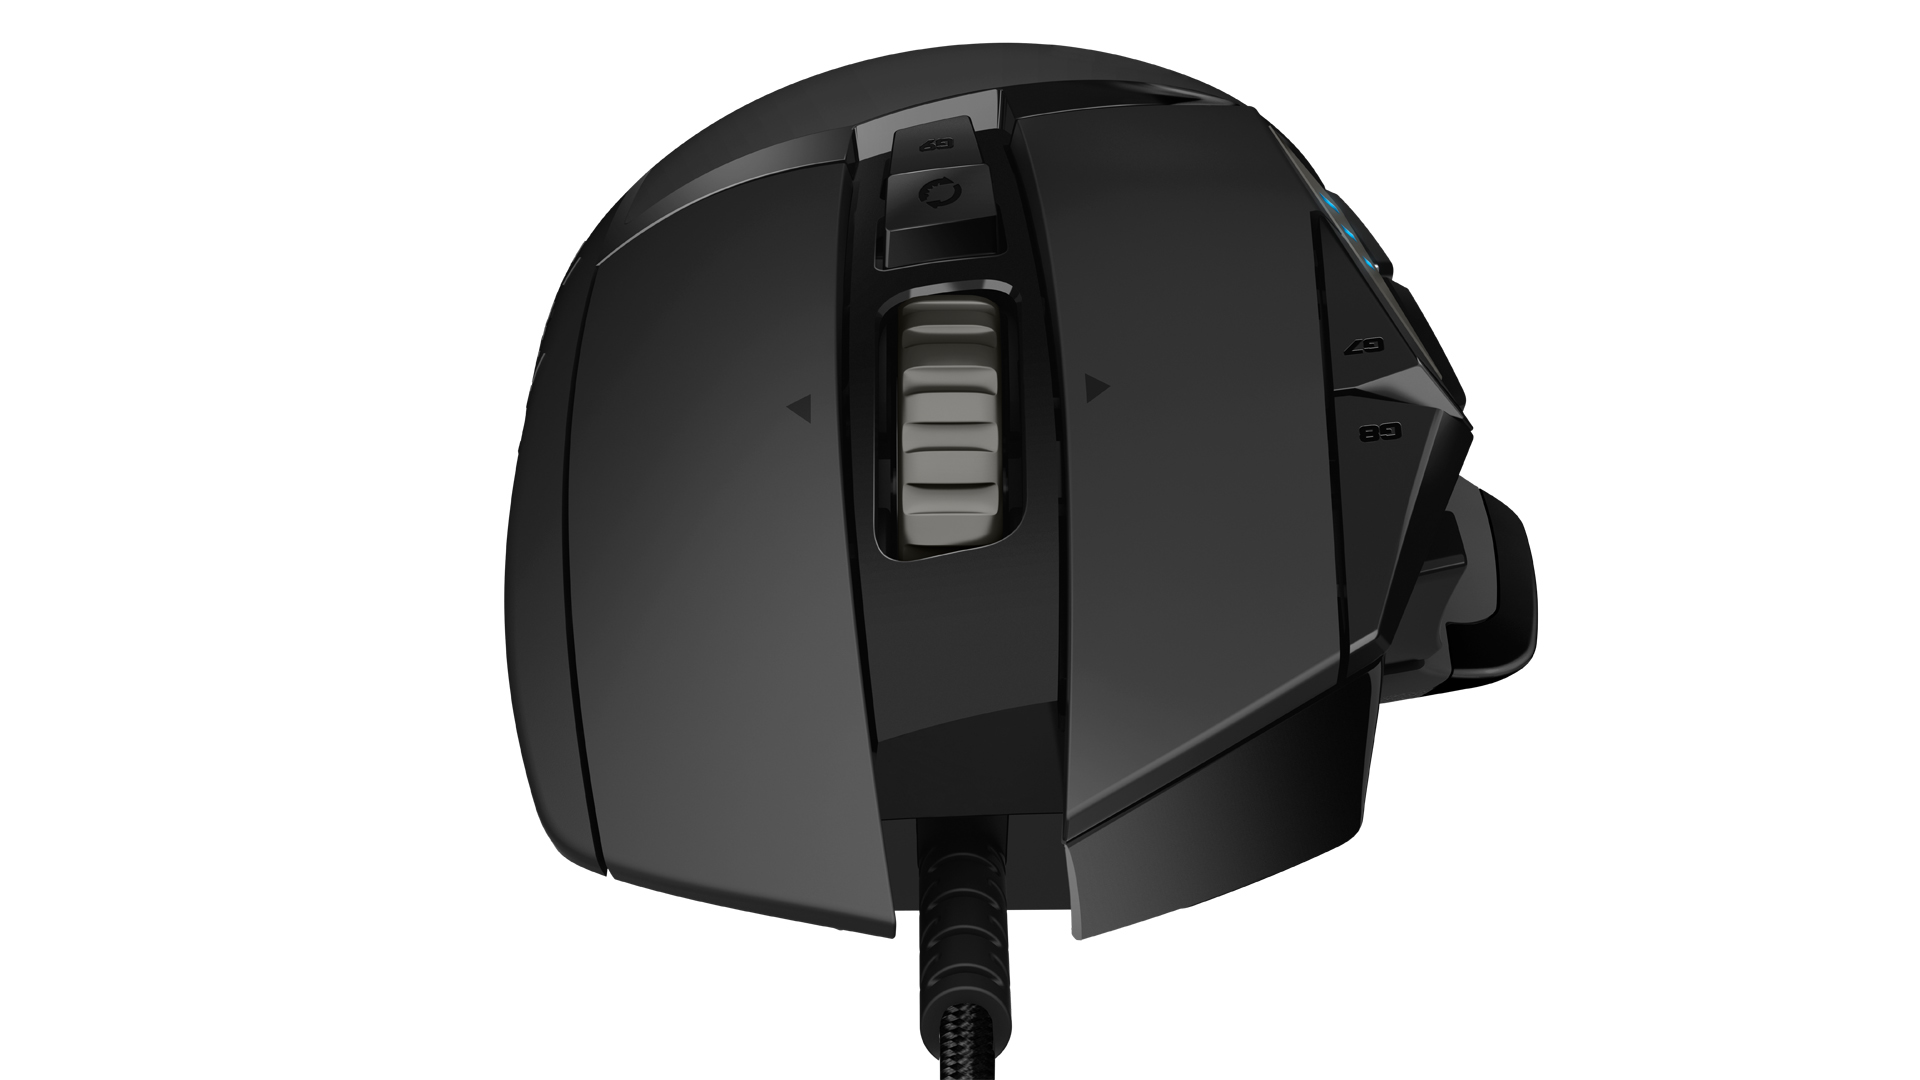 Logitech G502 HERO LOL Edition black/orange High-performance HERO 16K  Sensor: Logitech's most accurate sensor yet with up to 16,000 DPI for the  ultimate in gaming speed, accuracy and responsiveness across entire DPI